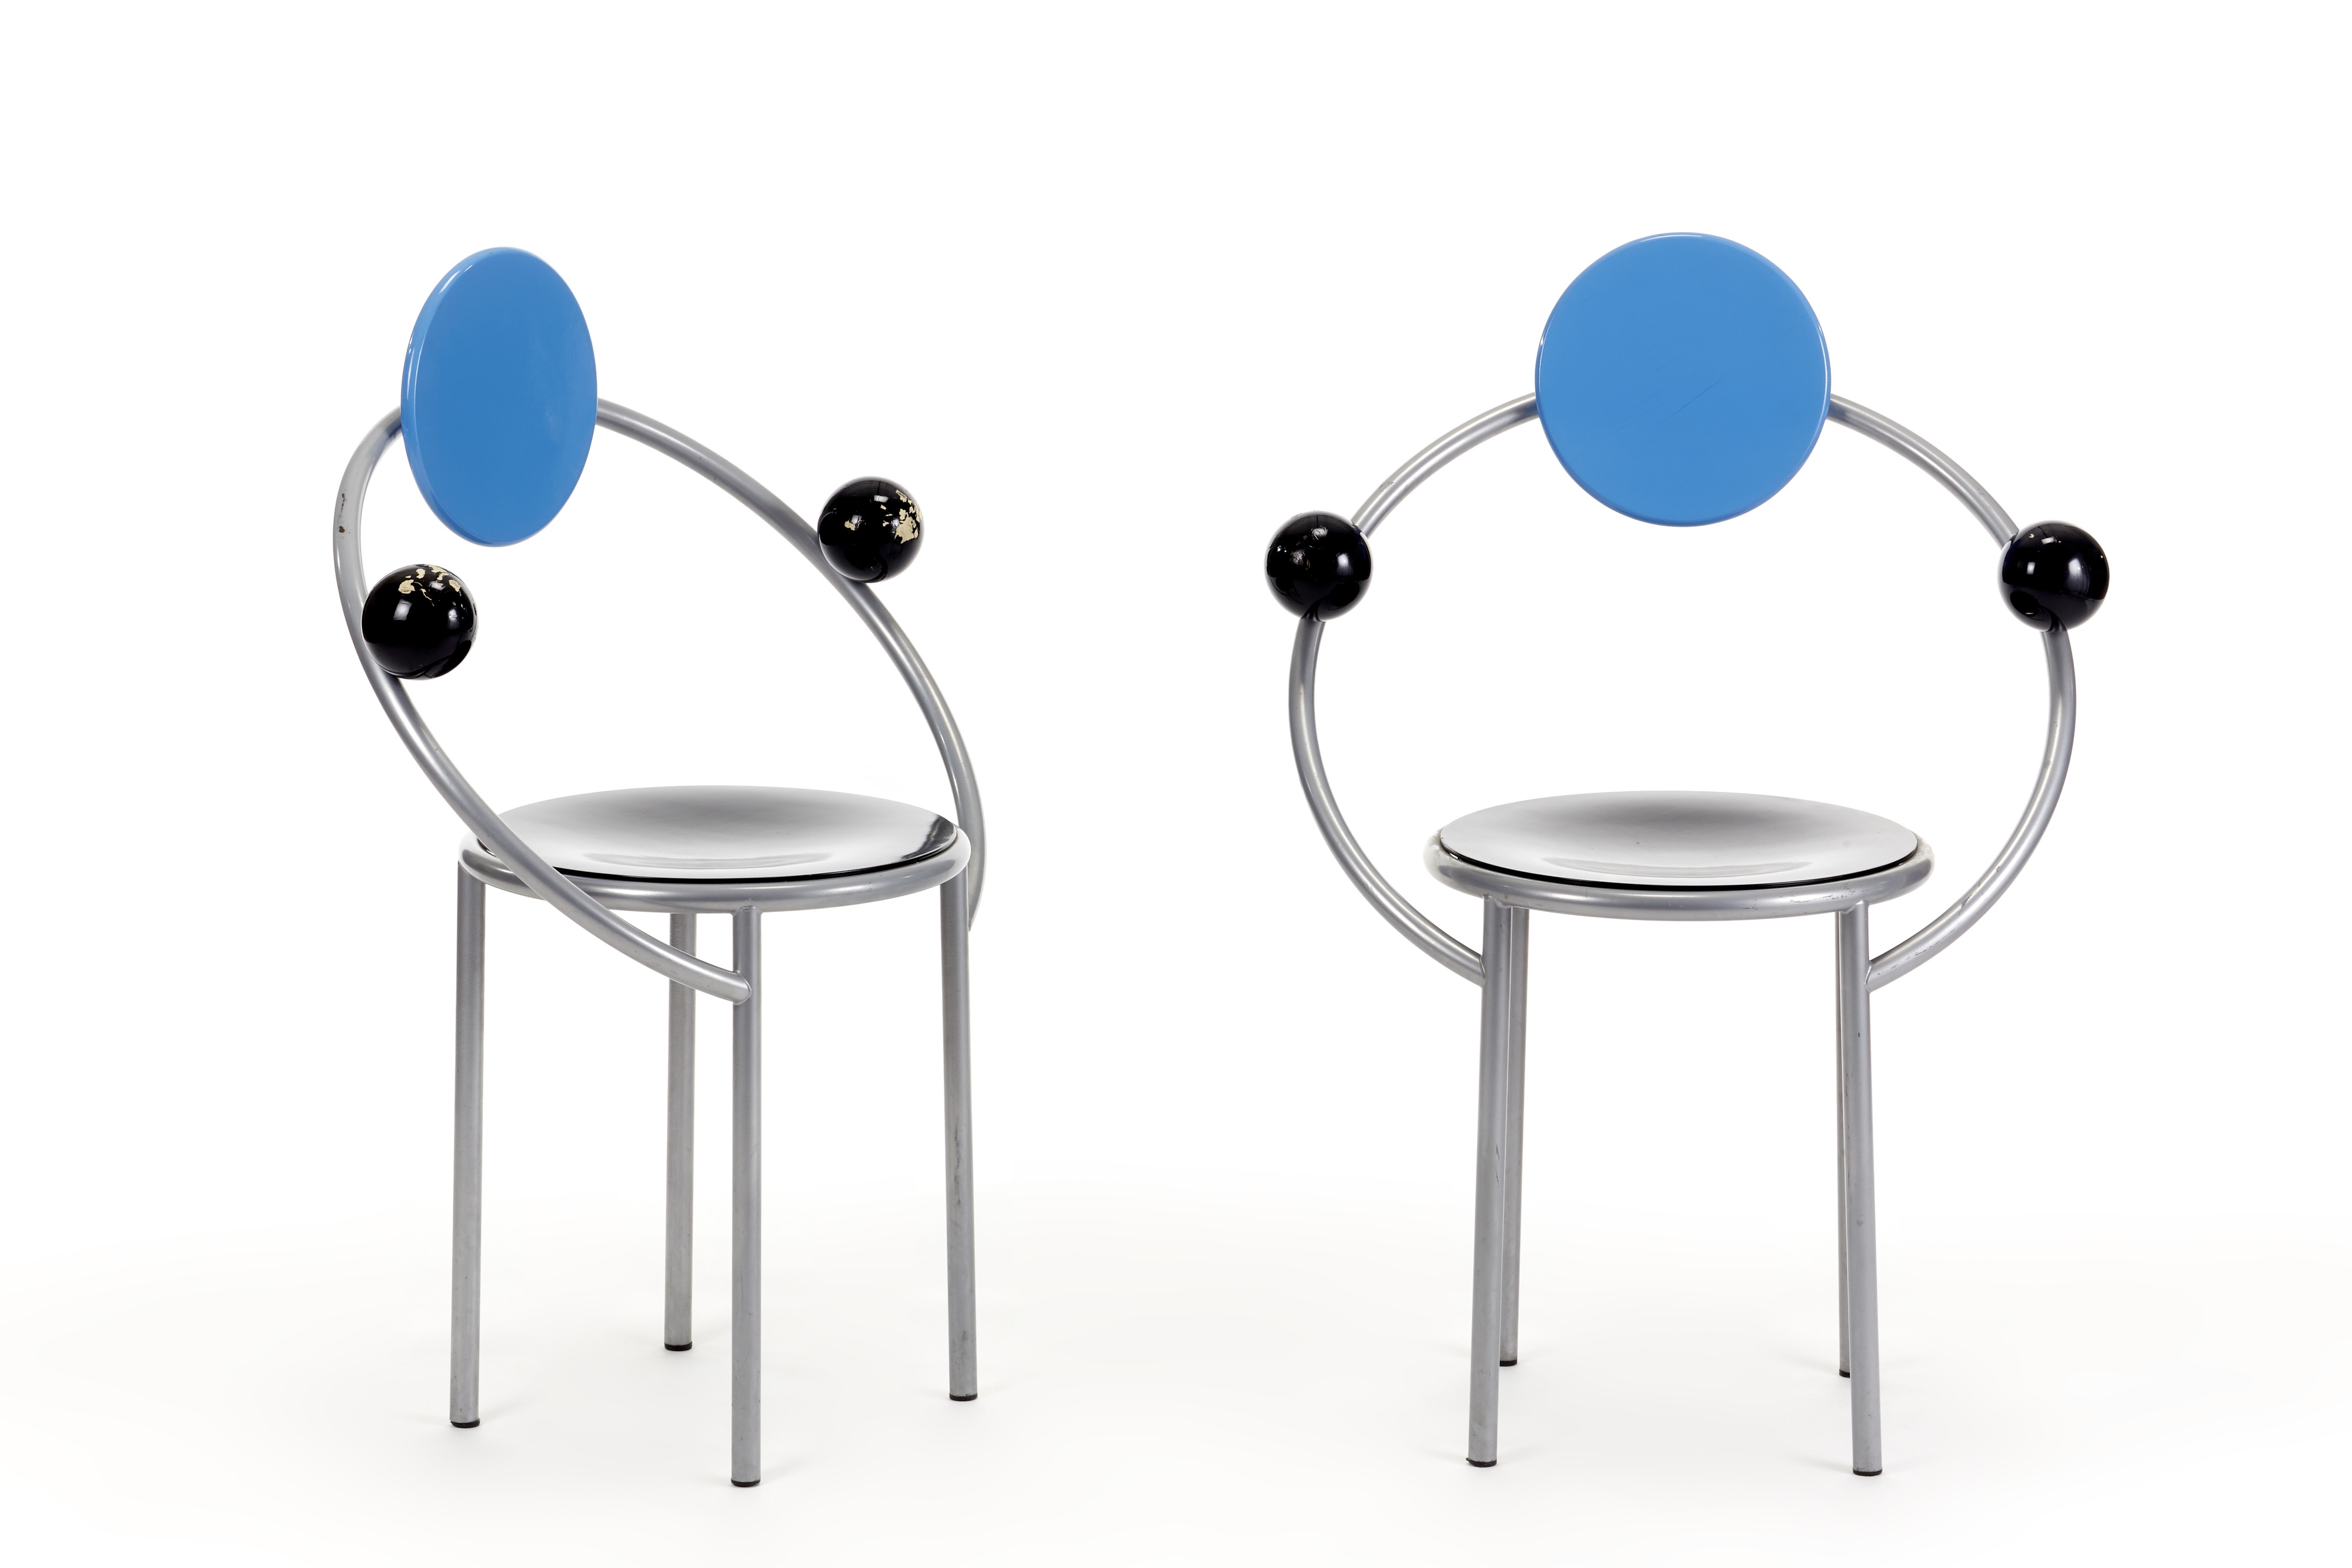 Two armchairs model "First" by Michele de Lucchi, 1983